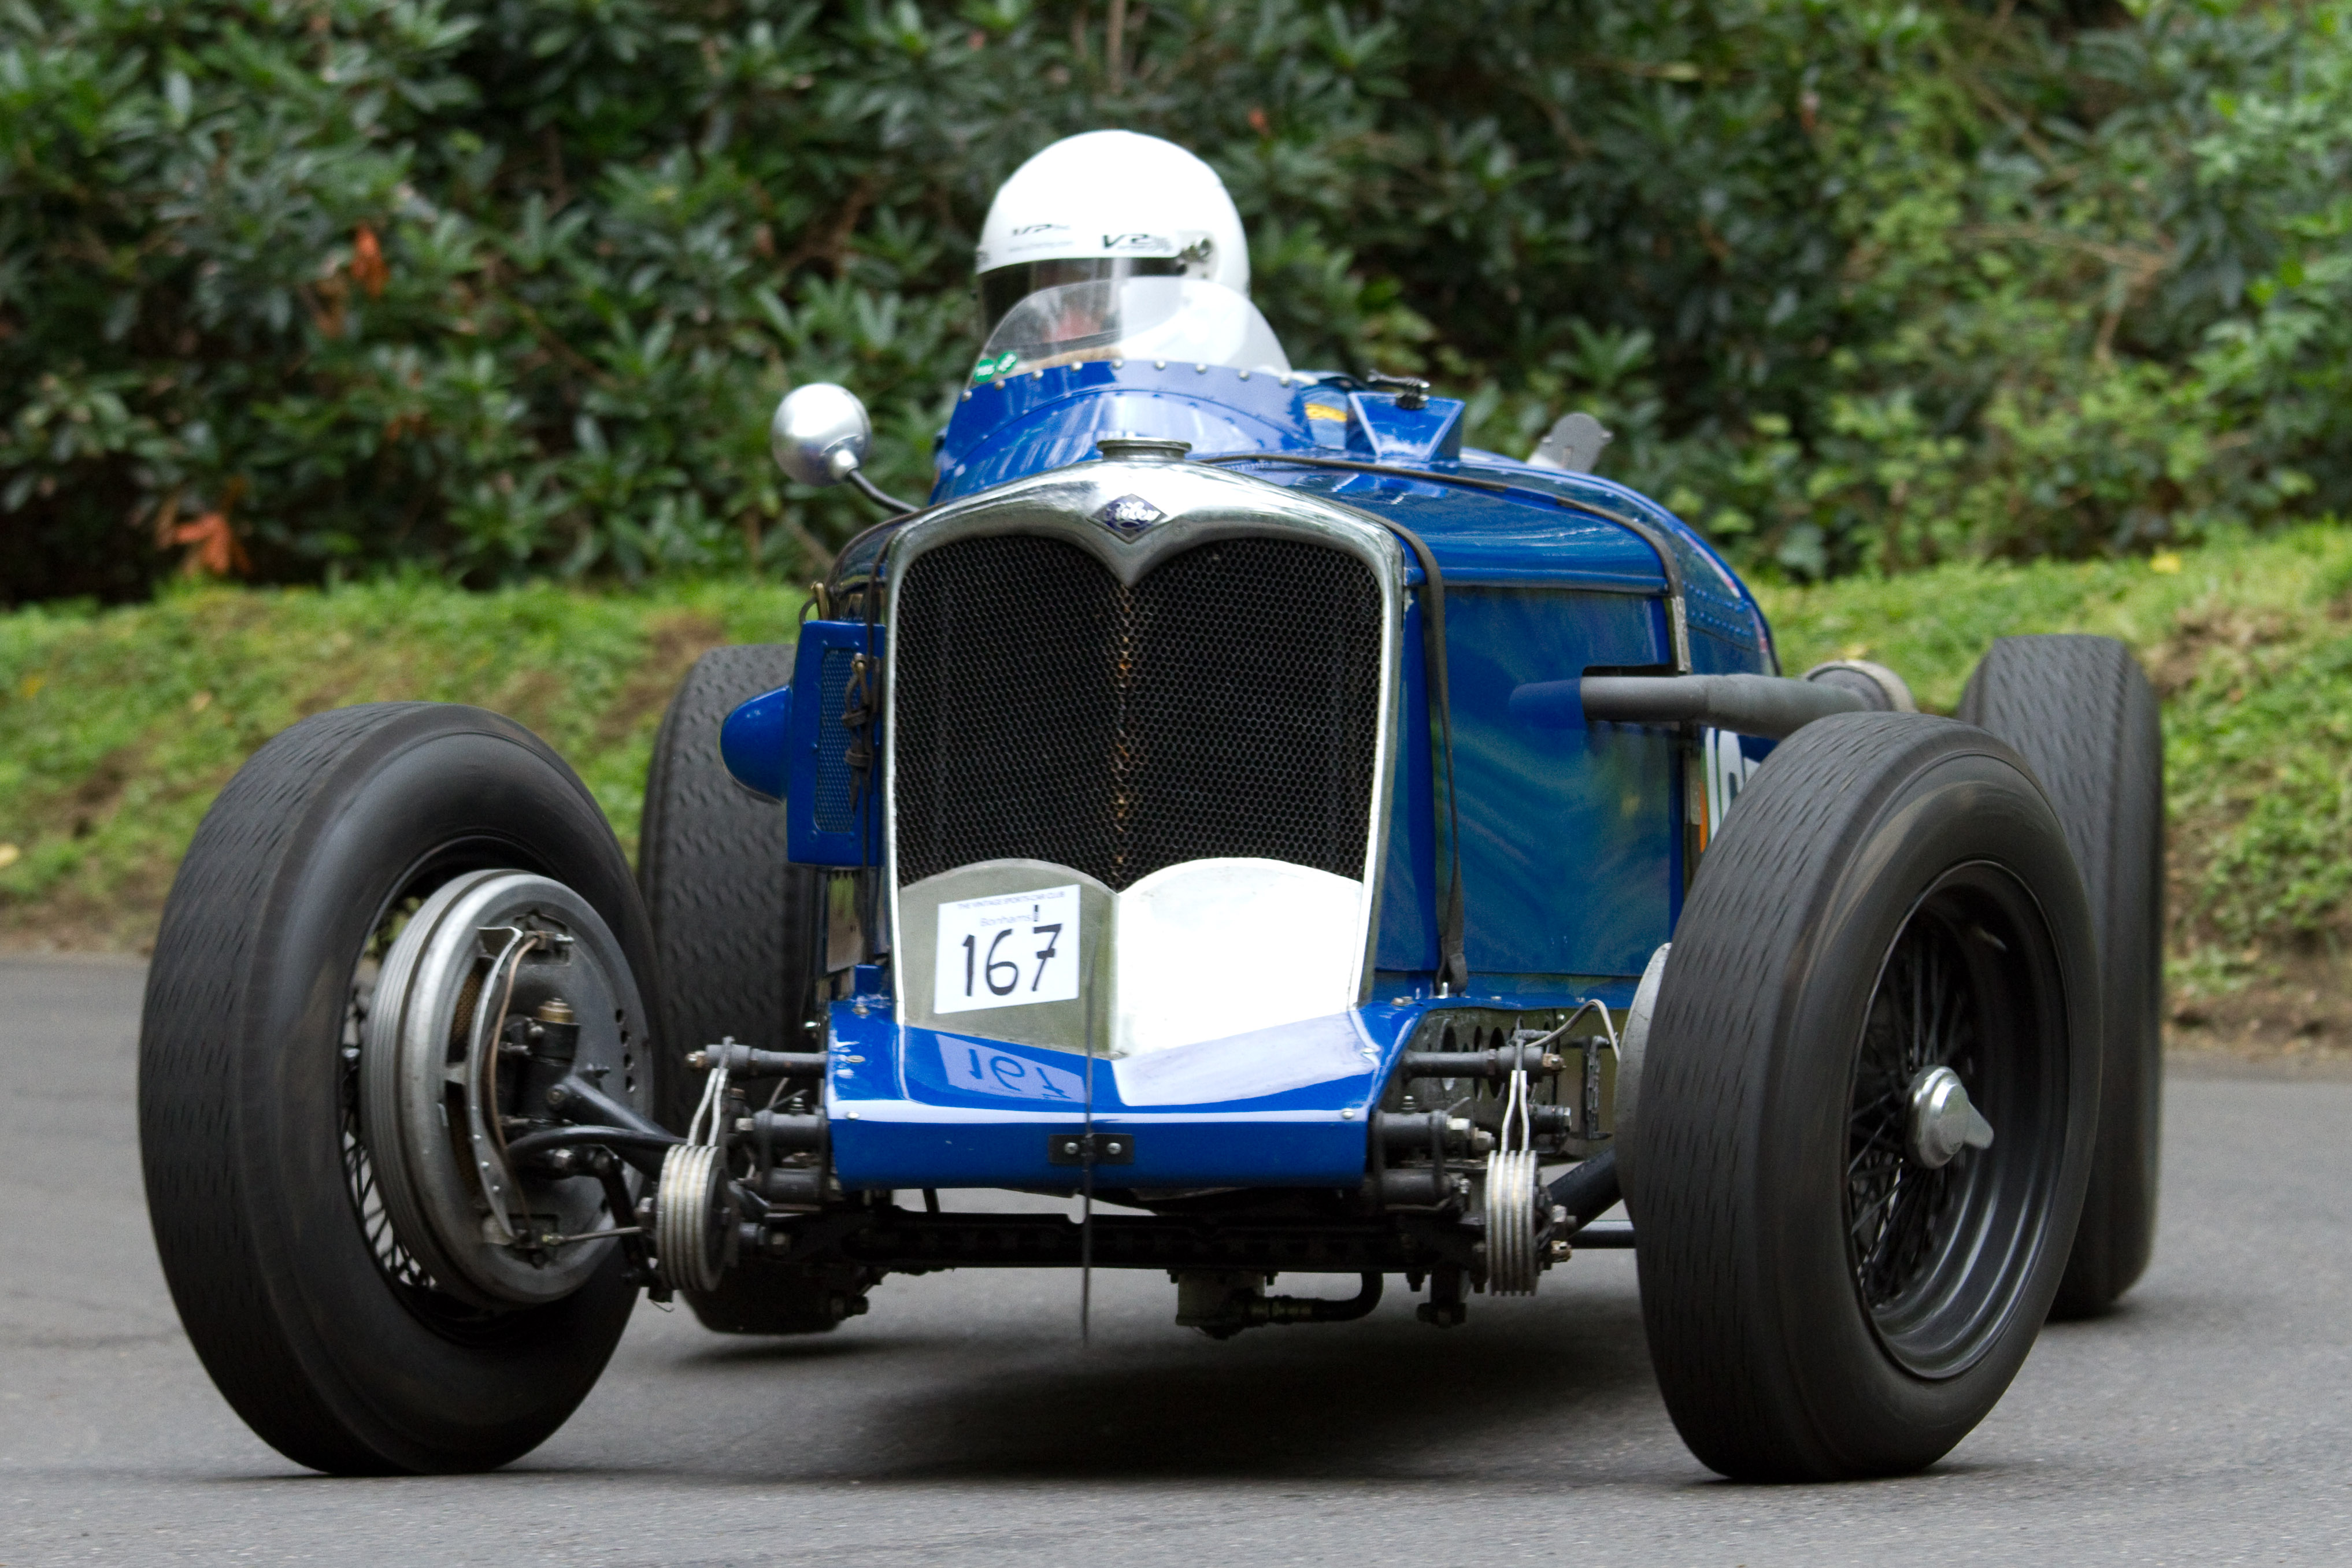 Wiscombe to welcome the VSCC for the start of the 2014 Hill Climb Season cover